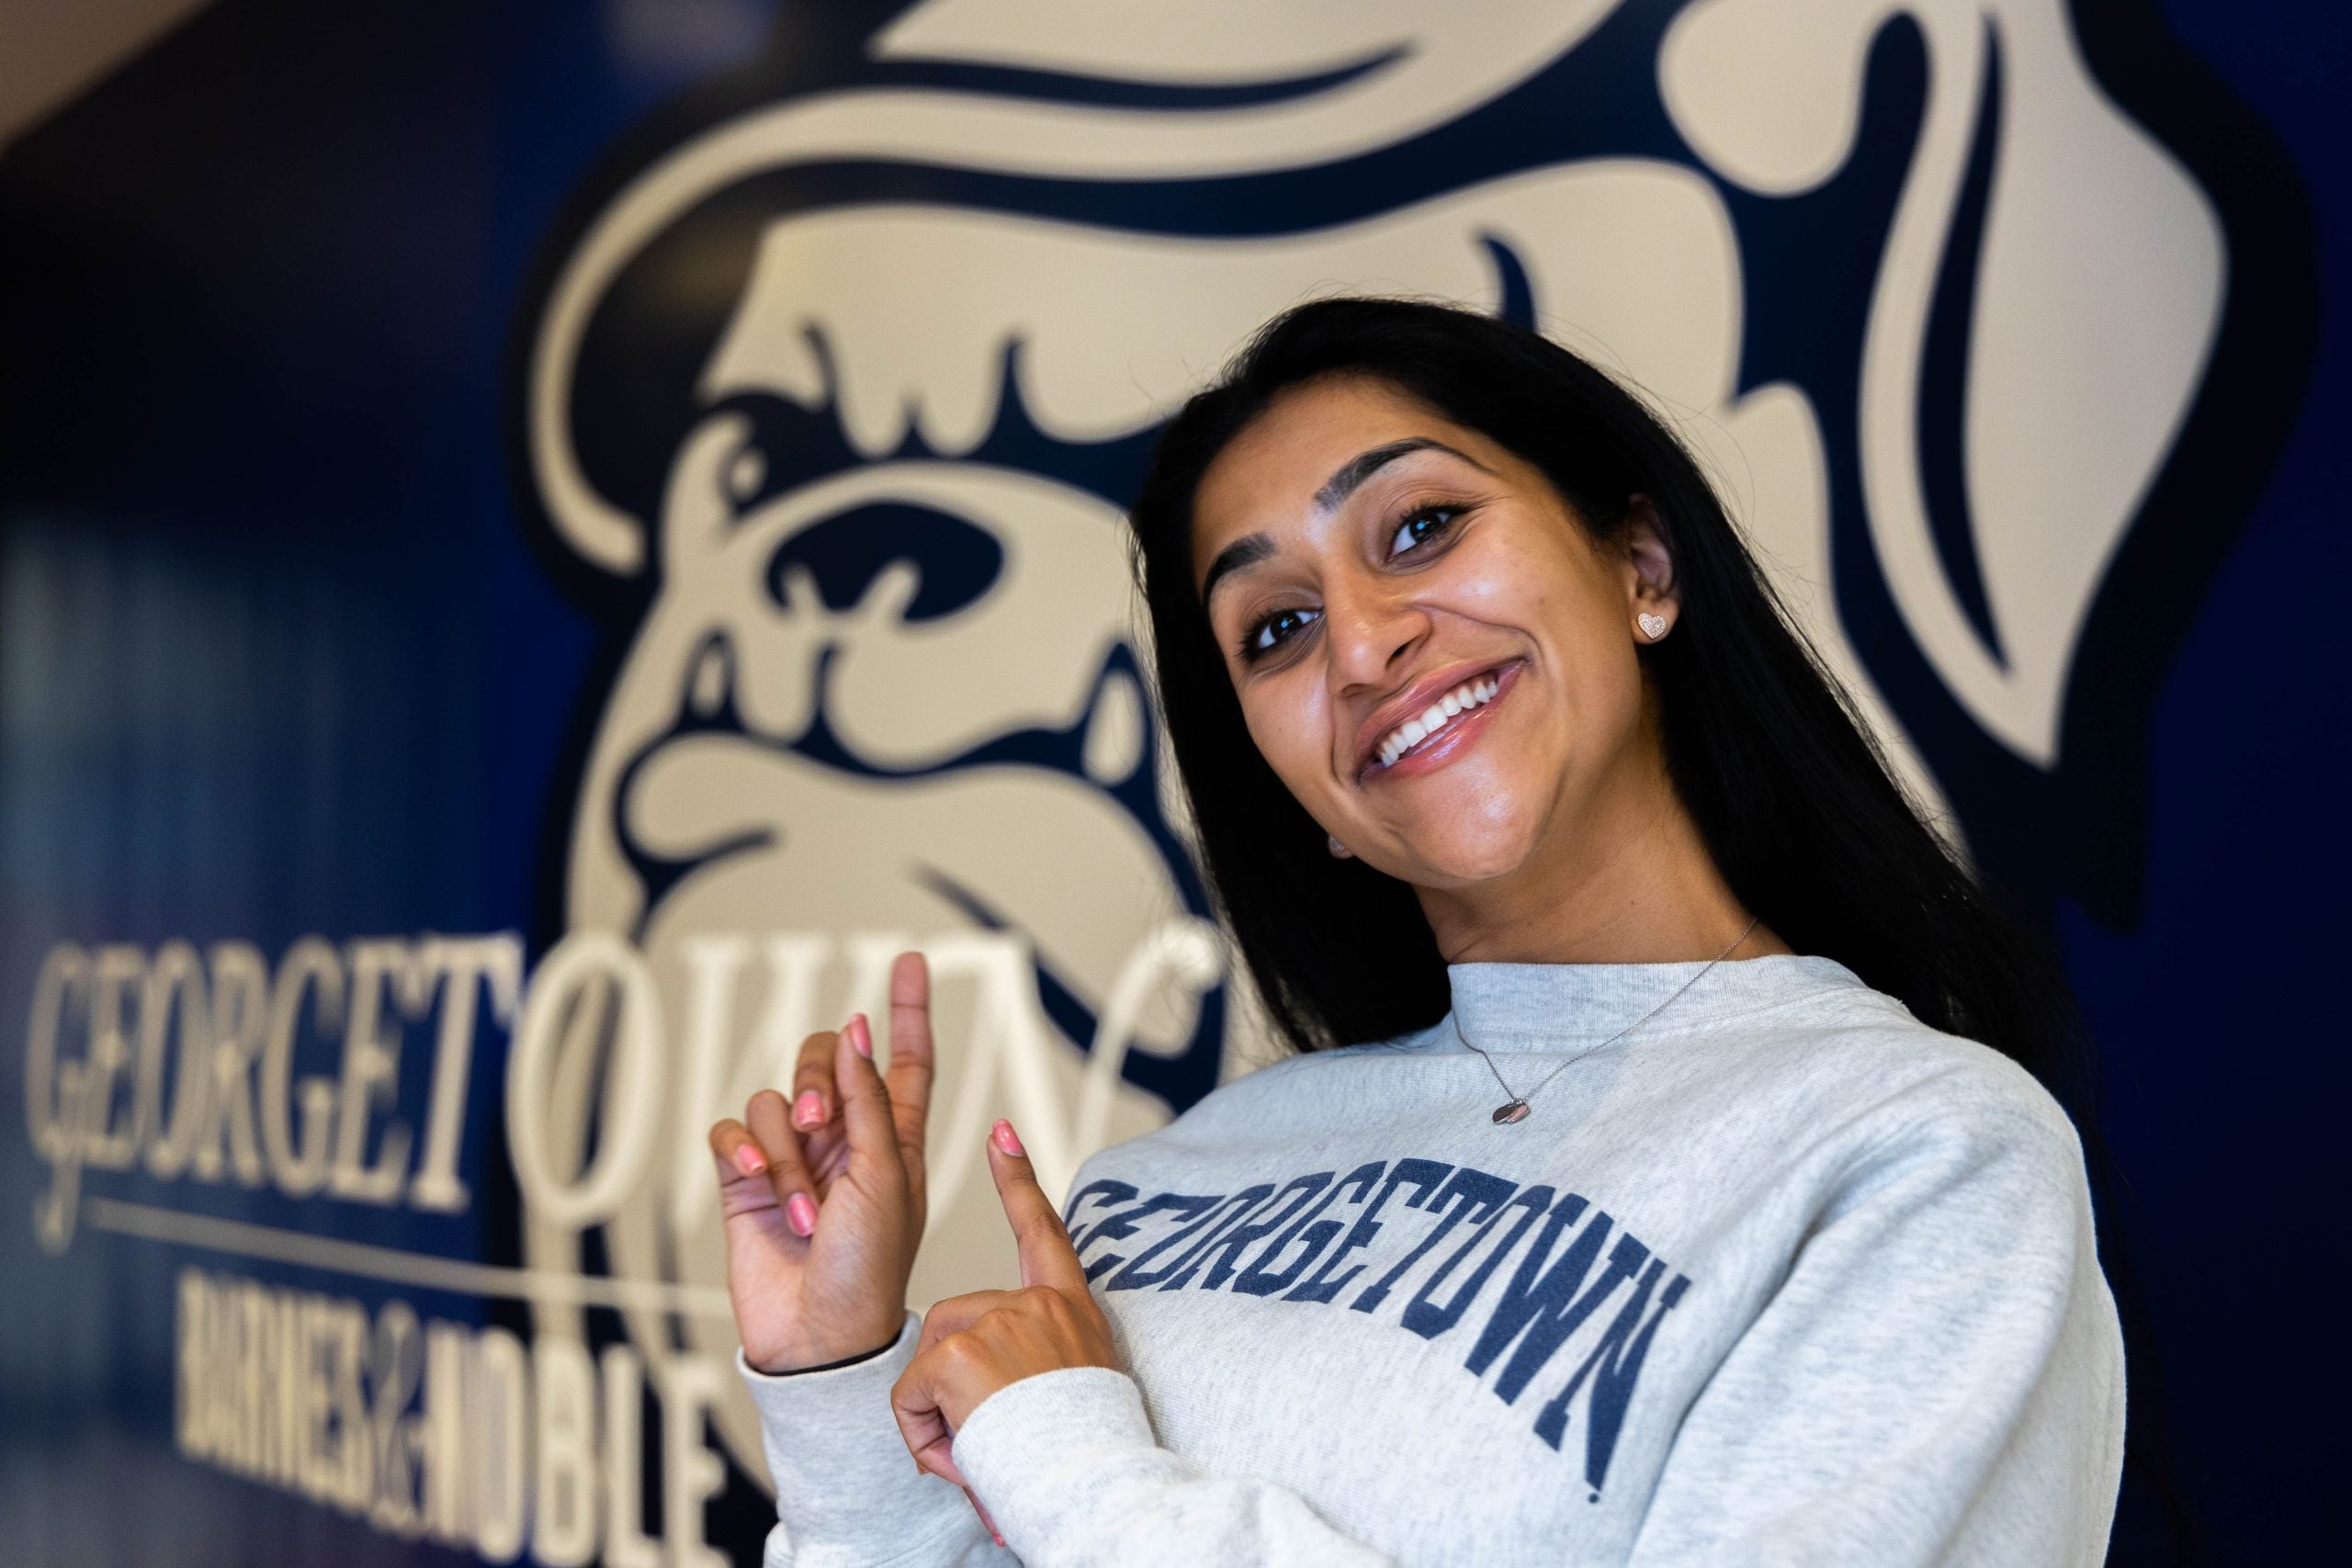 Young woman in a gray Georgetown sweatshirt points to a wall mural of Jack the Bulldog